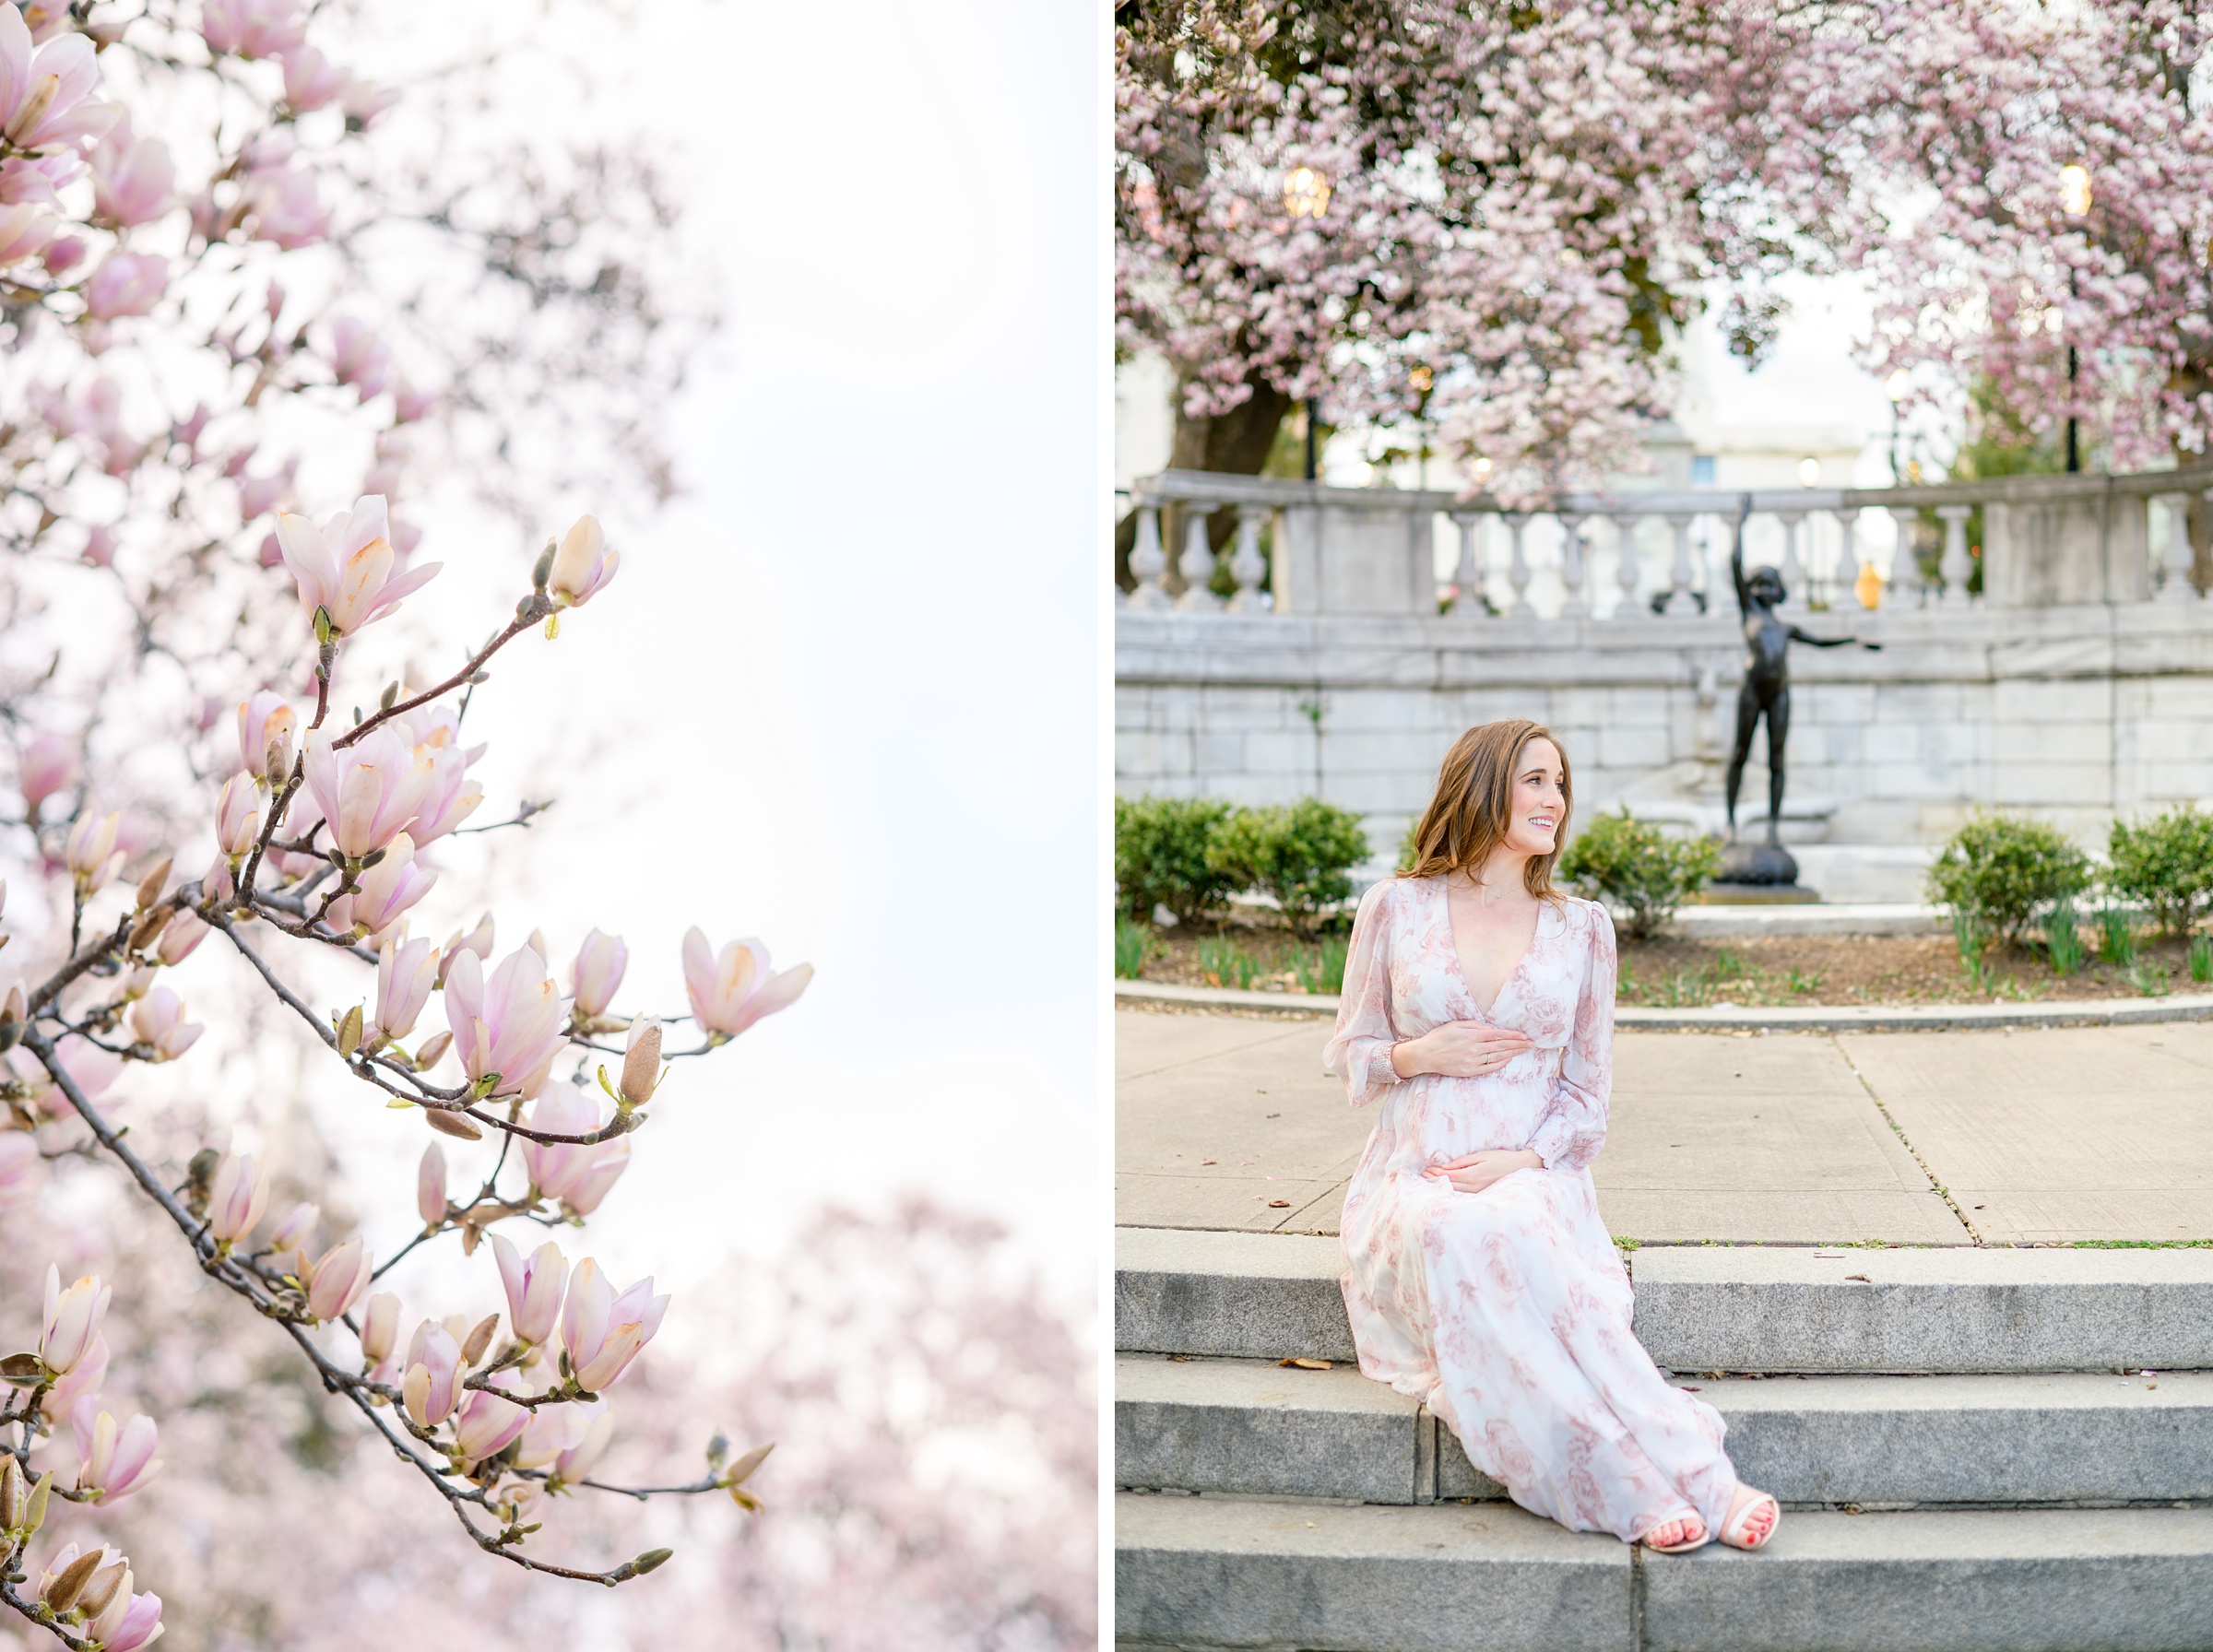 Meg and Sean's maternity photos in Baltimore featuring stunning pink magnolia blossoms by Baltimore Photographer Cait Kramer Photography